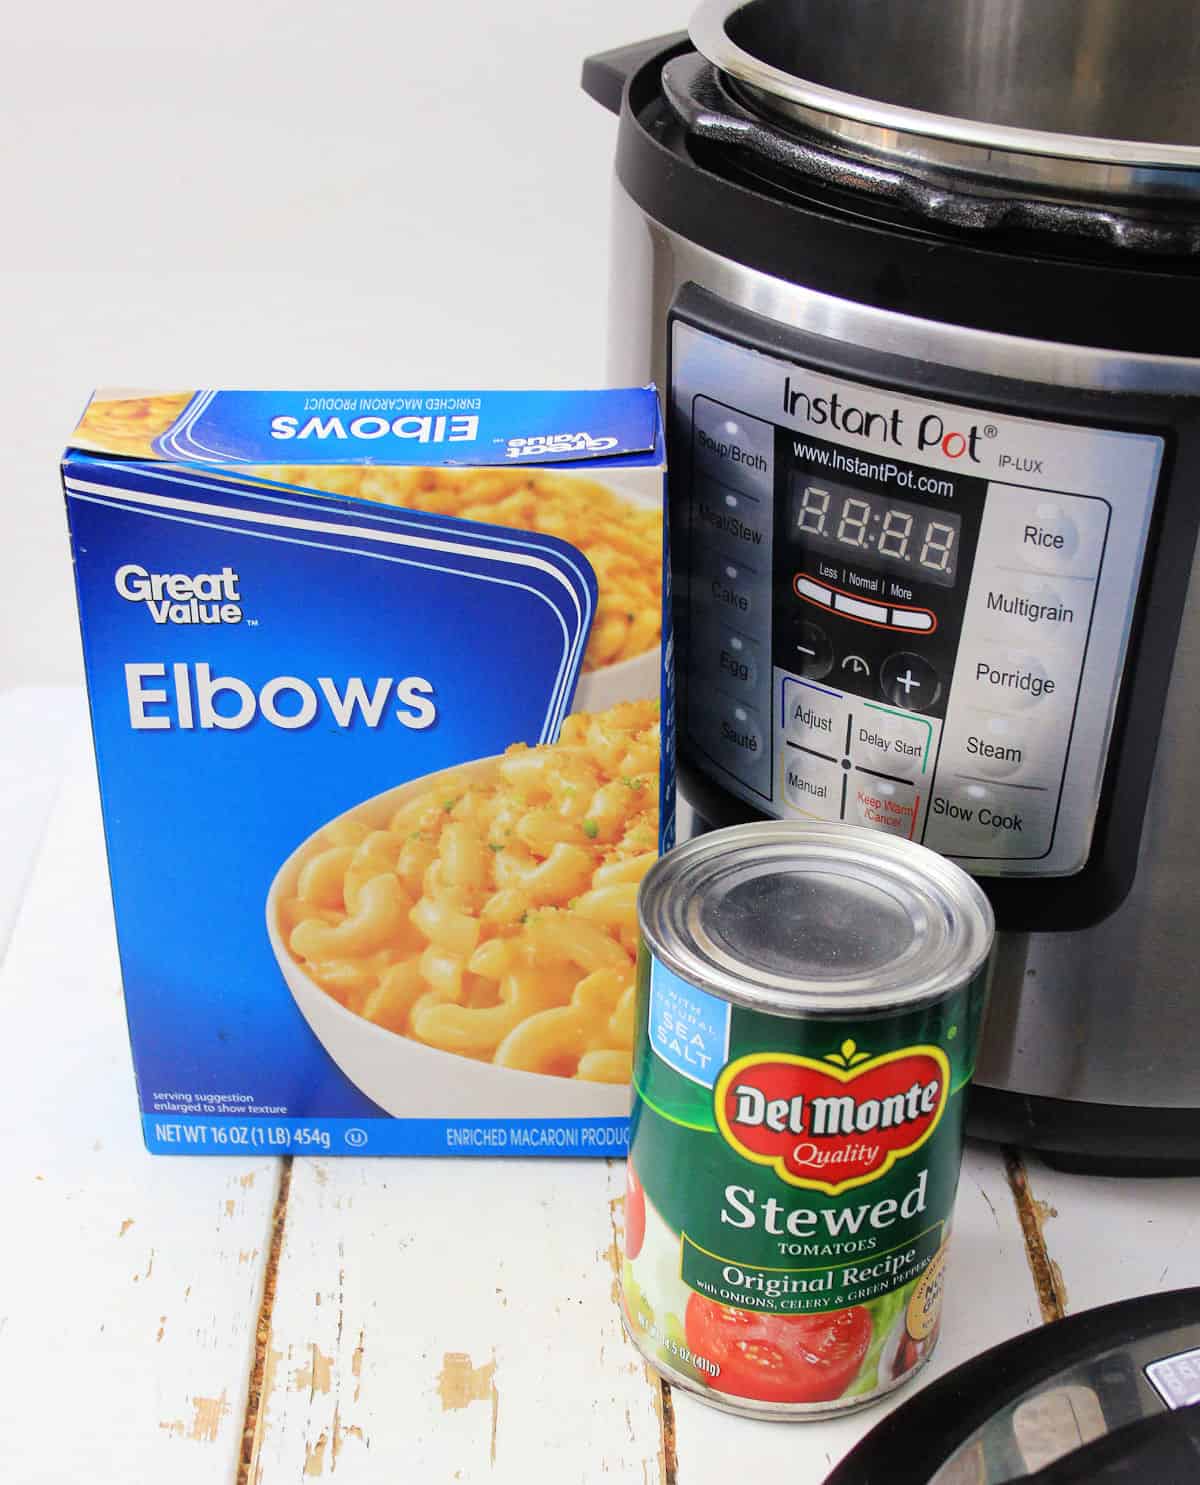 box of elbow noodles, can of stewed tomatoes and an Instant Pot